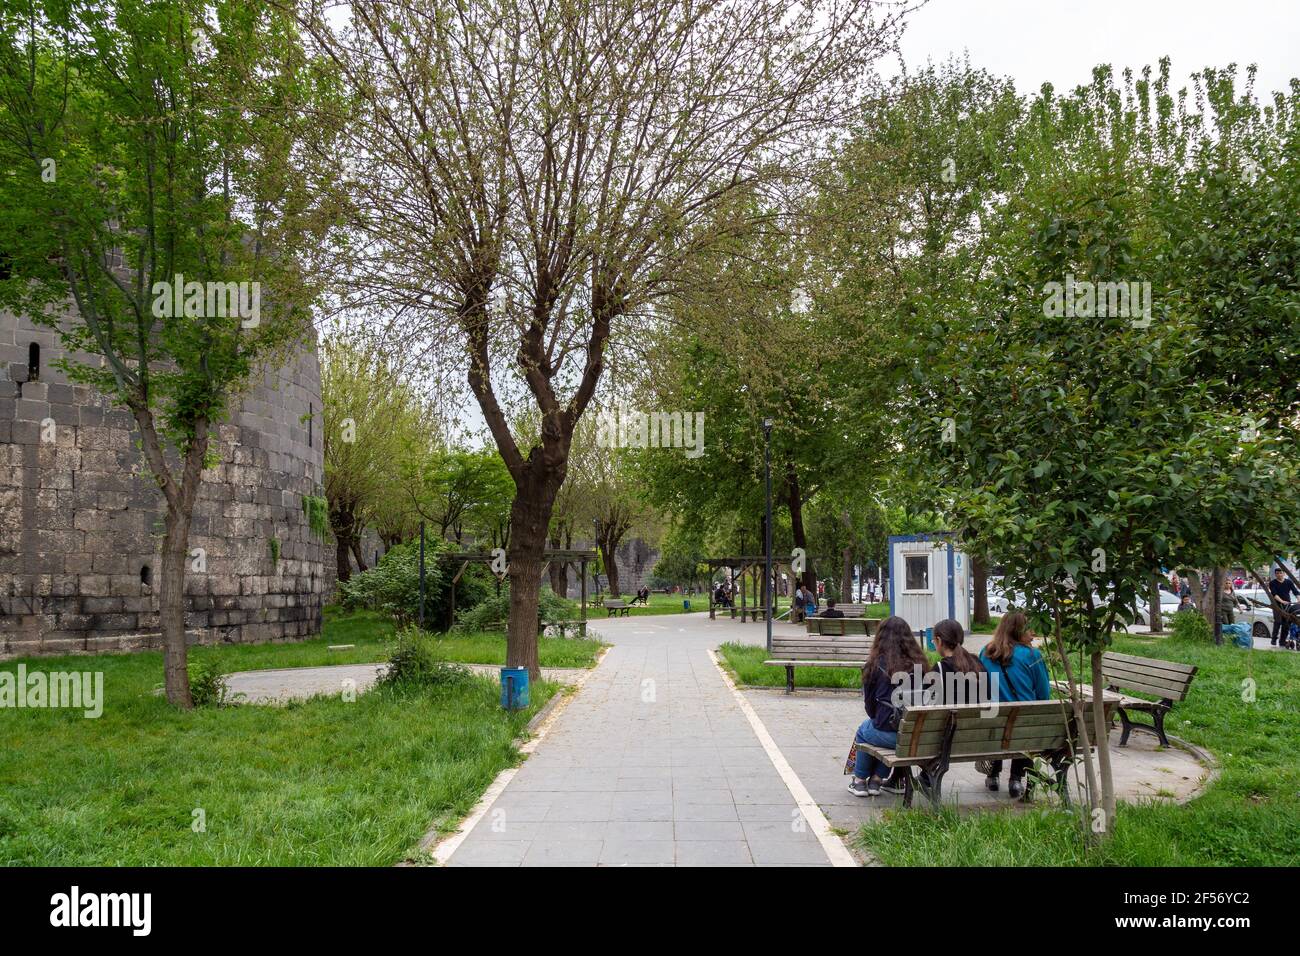 Diyarbakir / Turkey - 05/01/2019: Old City Walls in the city of Diyarbakir, Turkey. People walk around the city walls and rest. Stock Photo